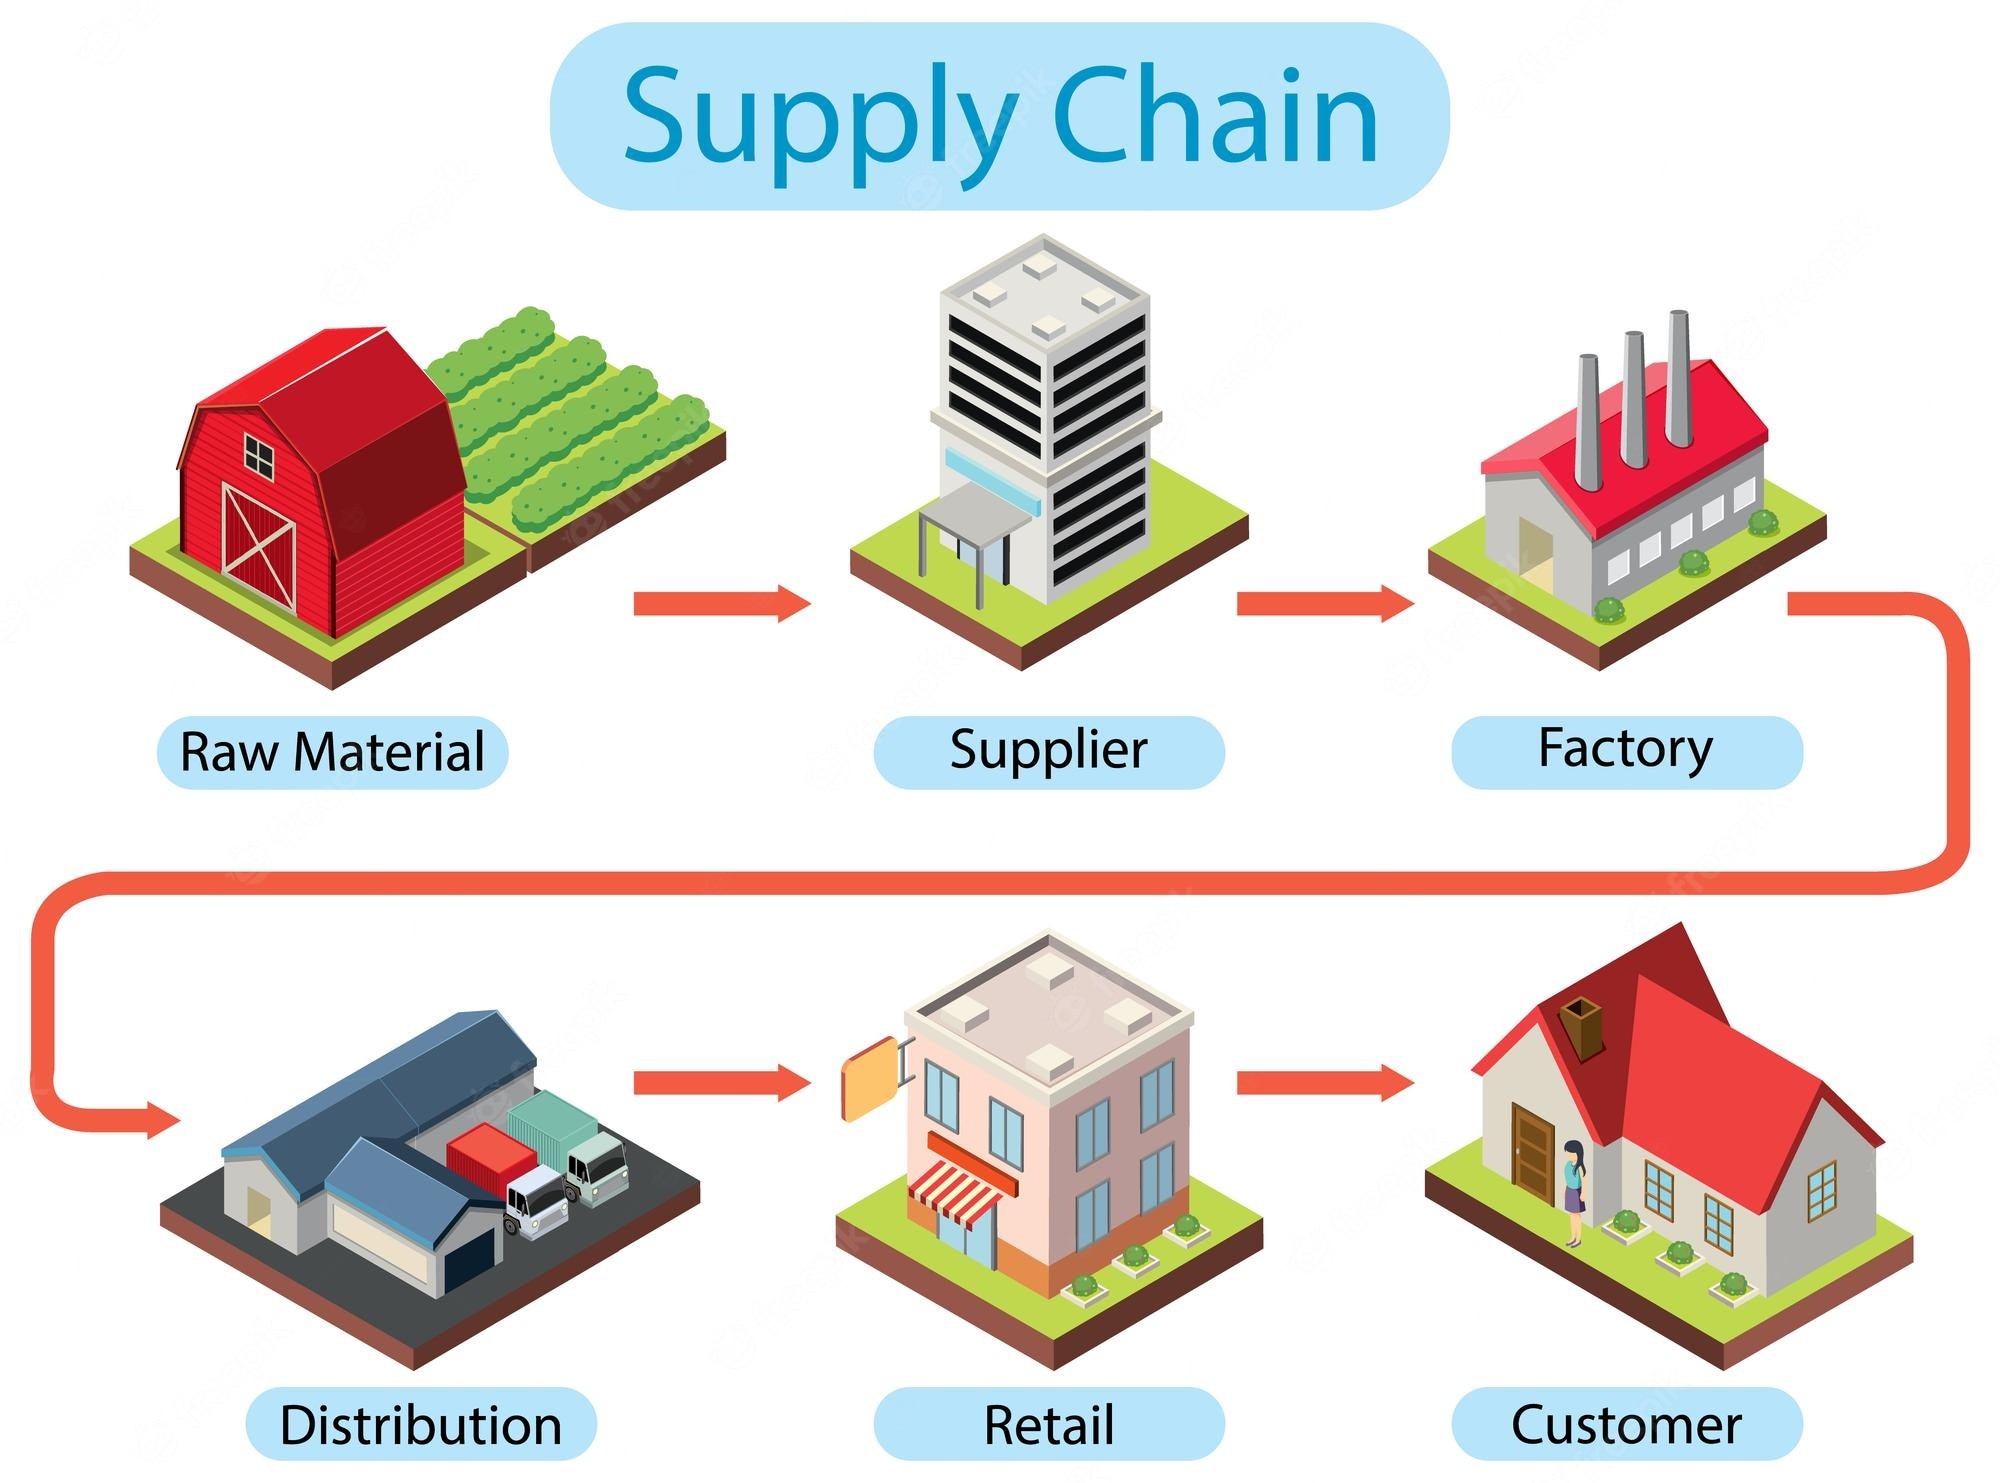 What Online Supply Chain Management Certification Will Help You Land Your Next Job?